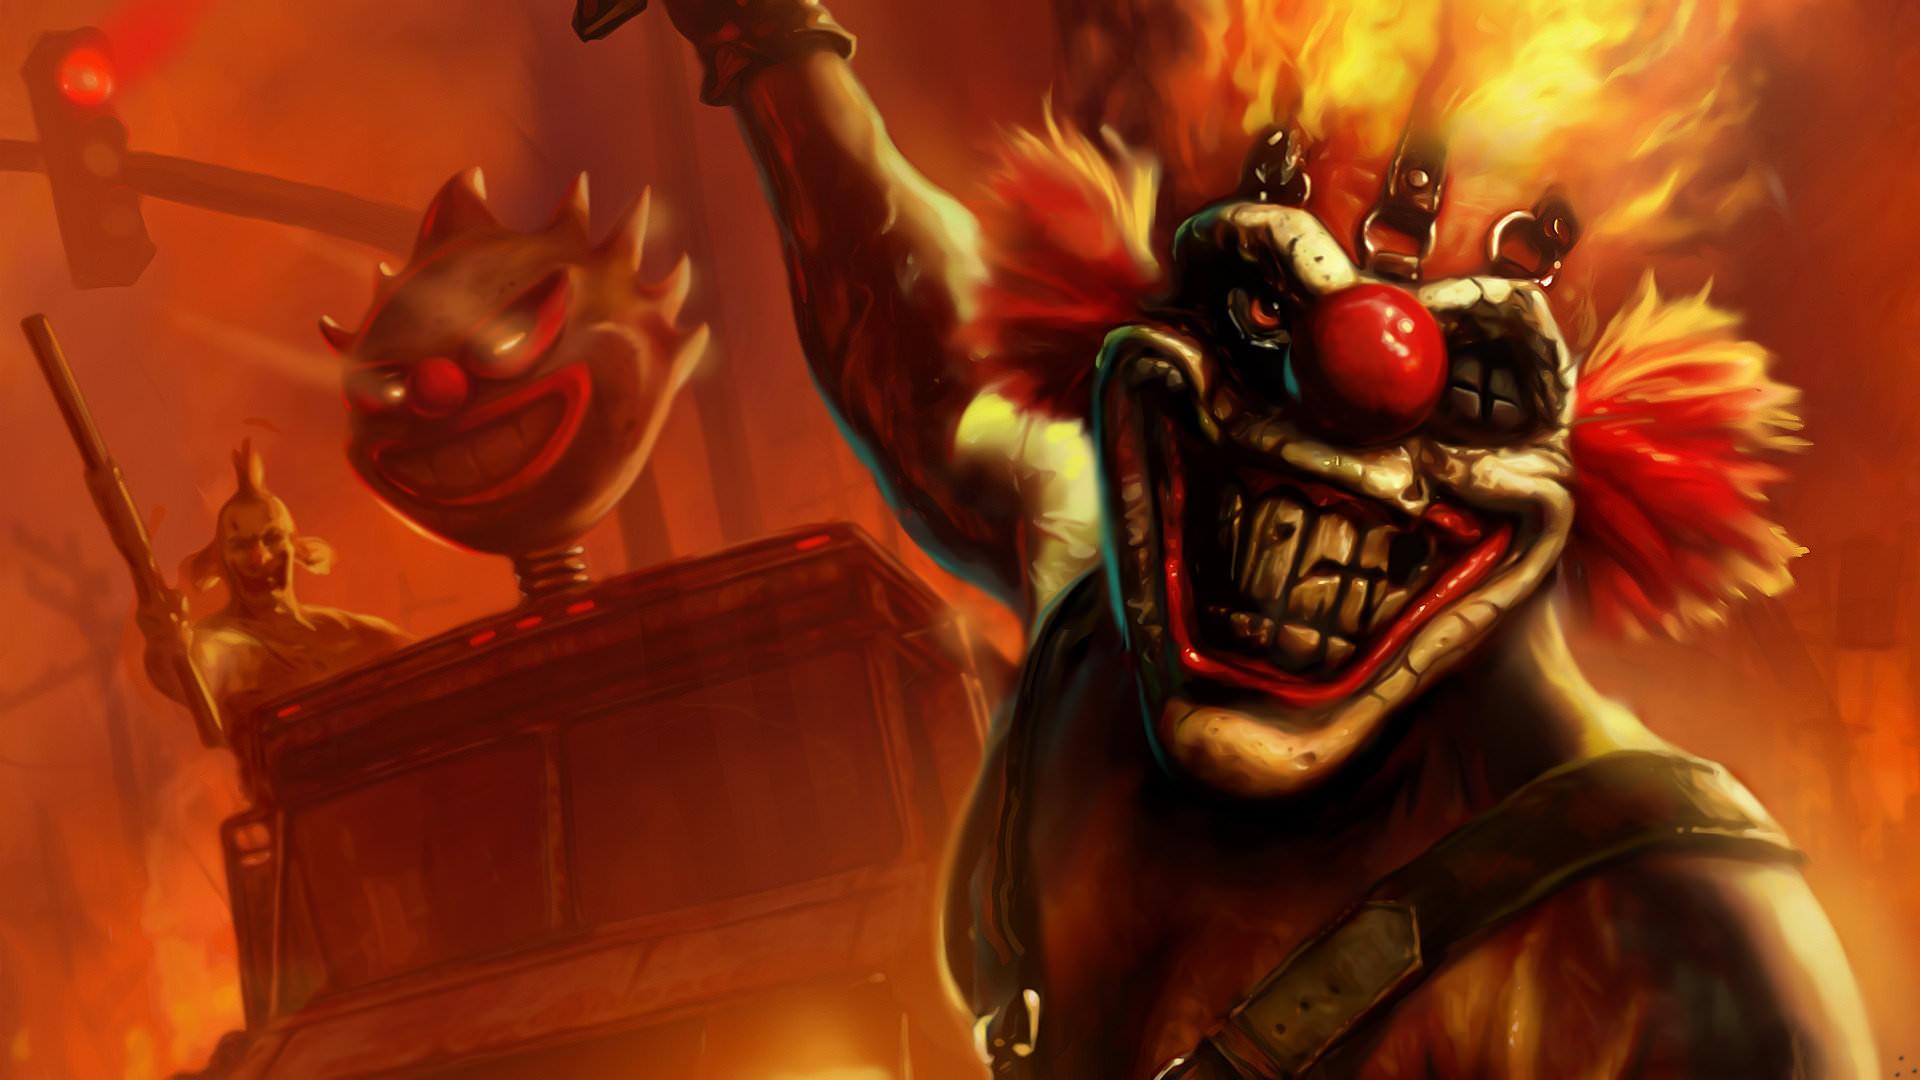 Best Twisted Metal background for High Resolution full HD